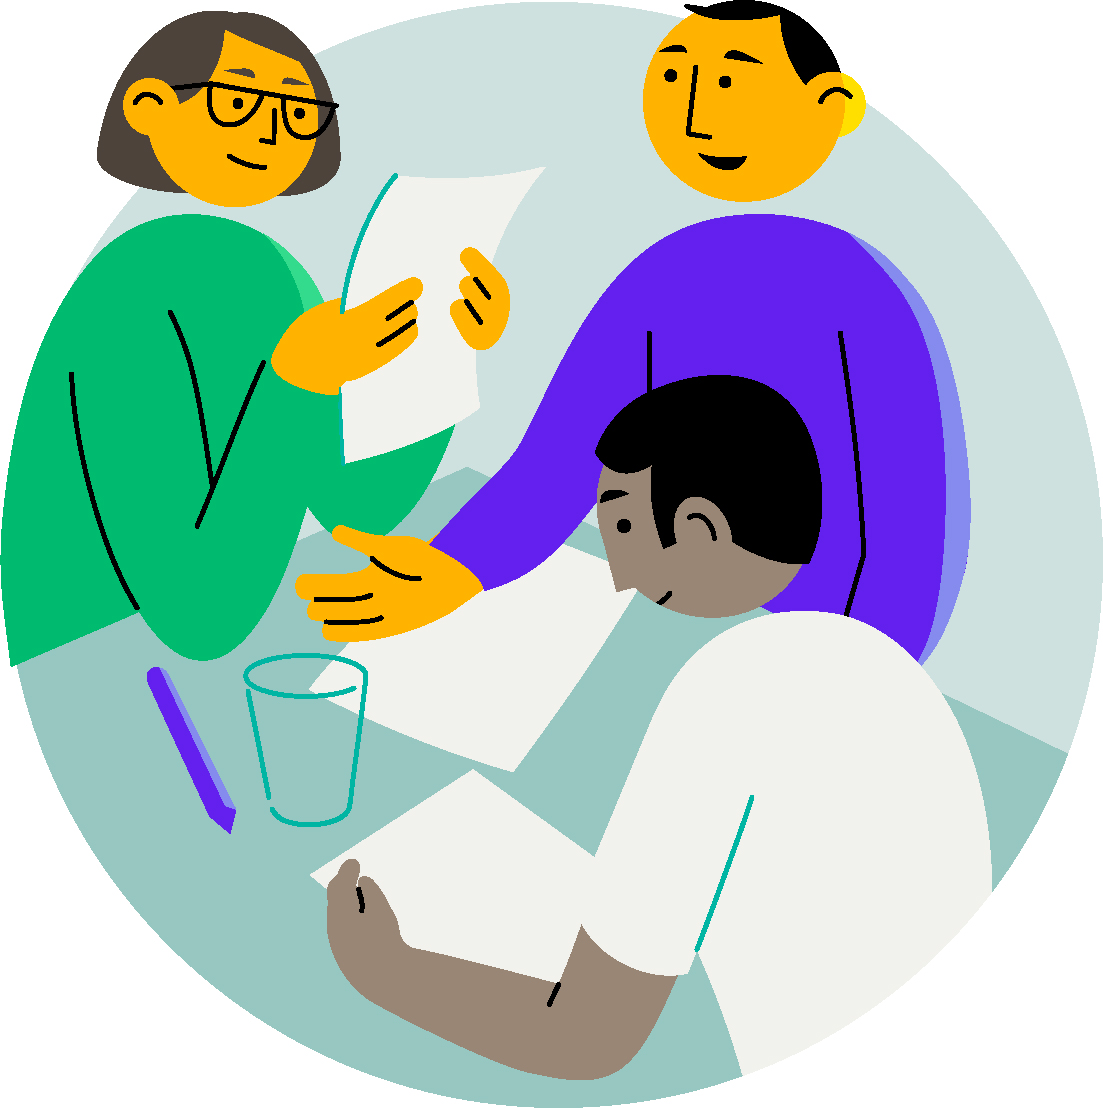 8 rules for effective peer feedback in a group | Writing Scientist